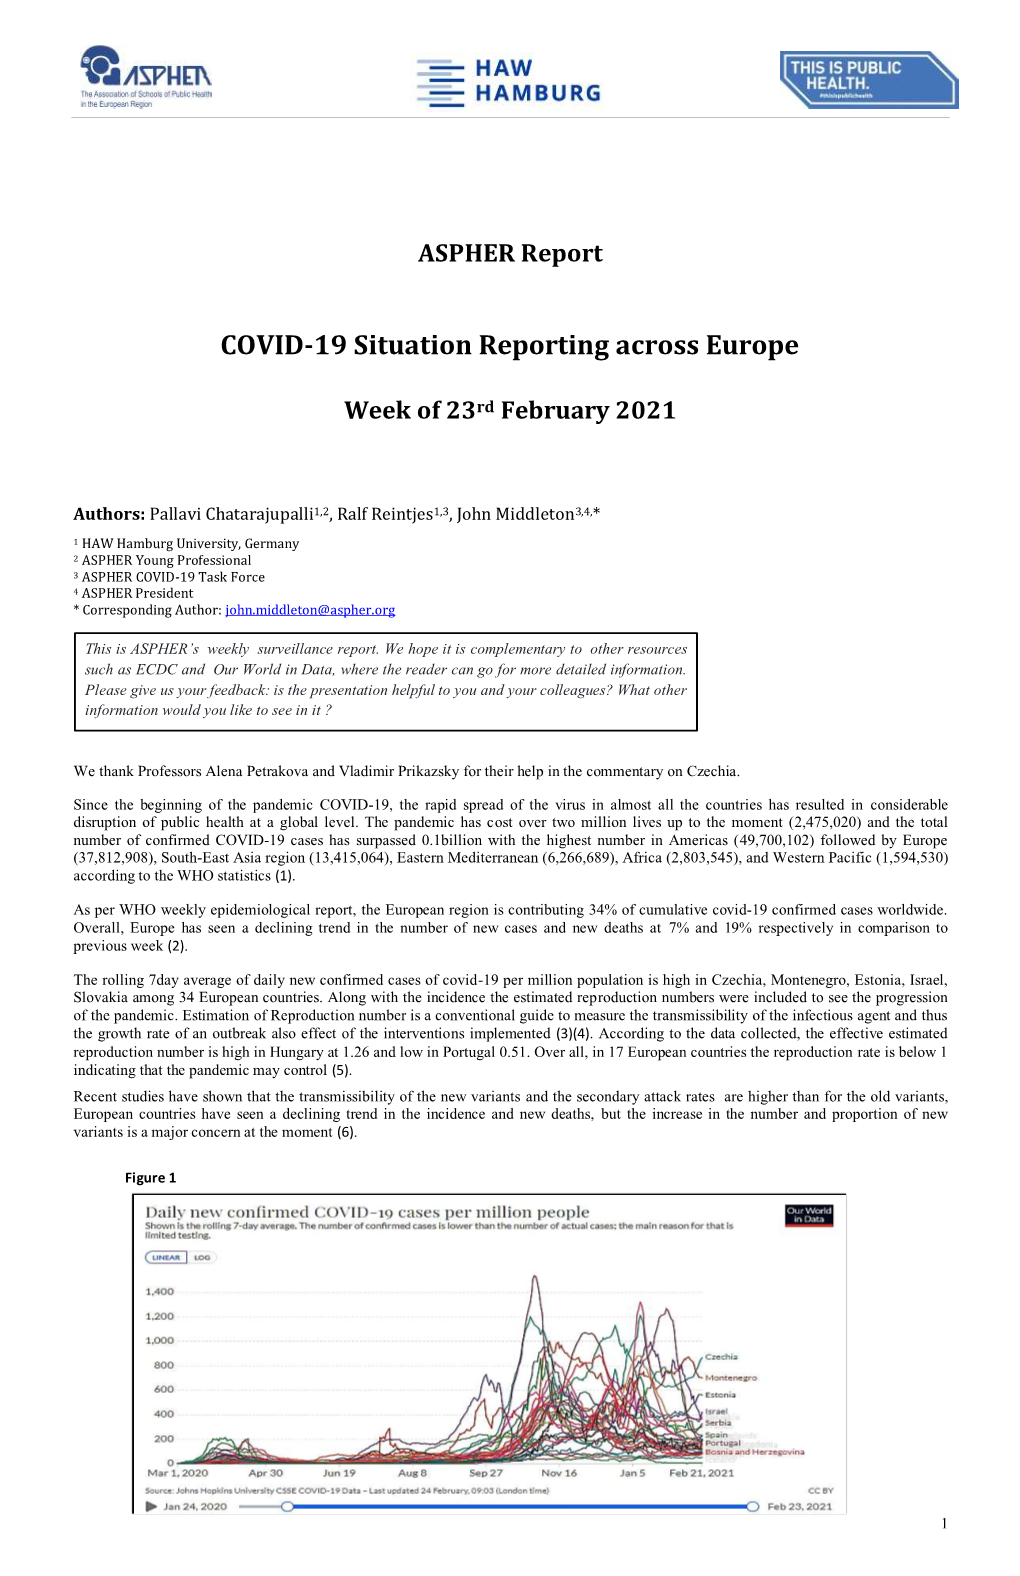 COVID-19 Situation Reporting Across Europe